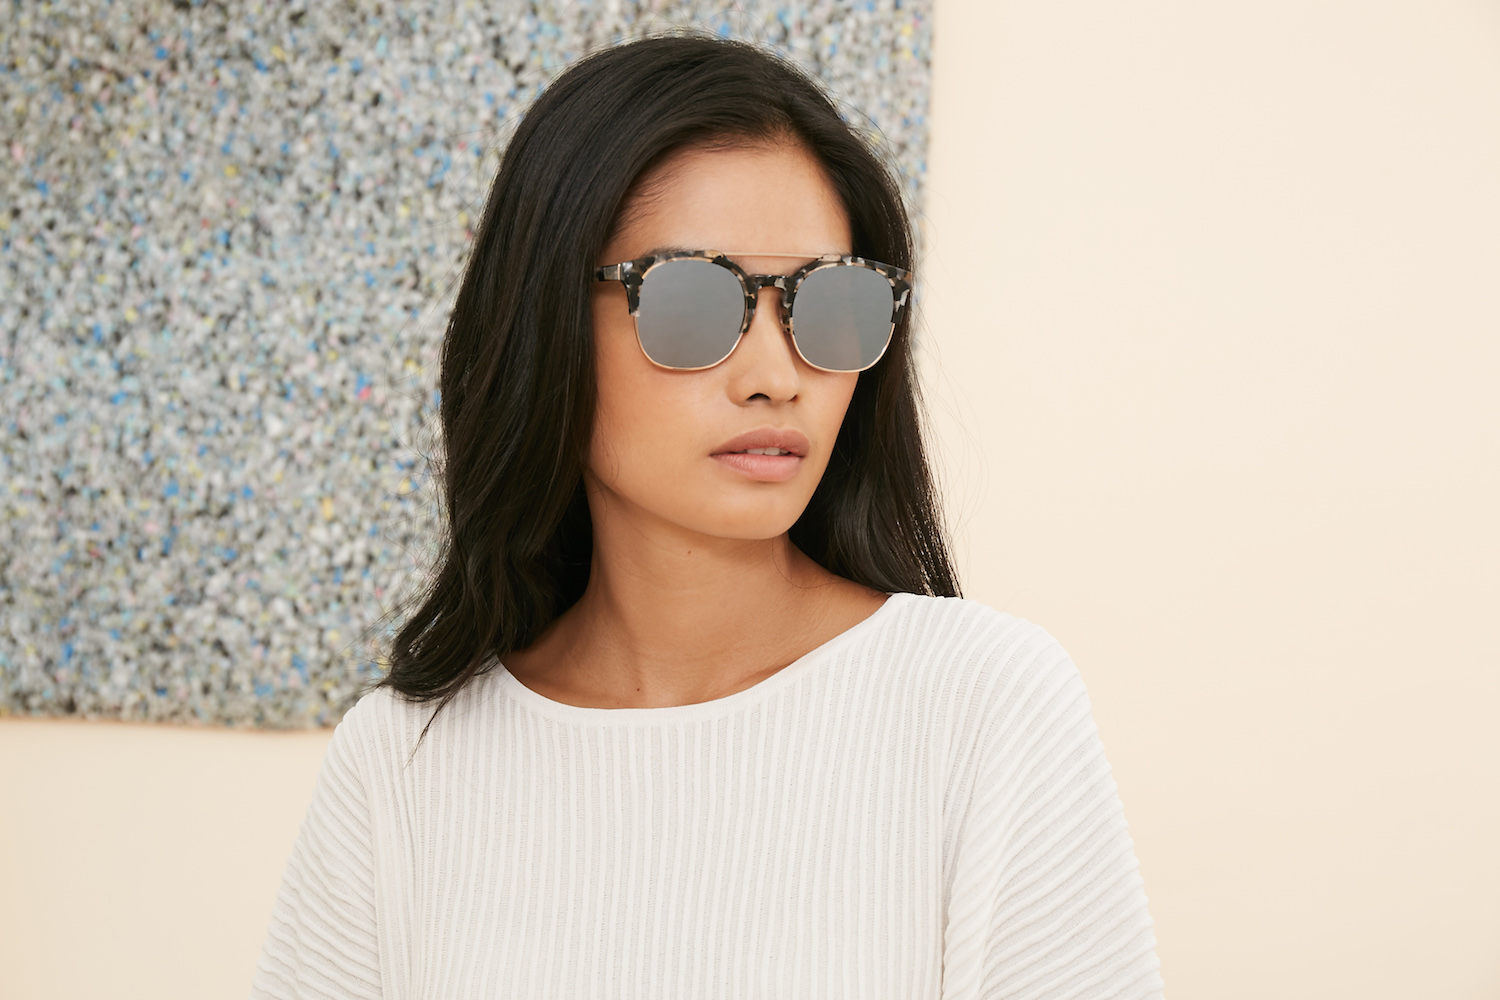 COVRY's Latest Sunglasses Collection for 2018